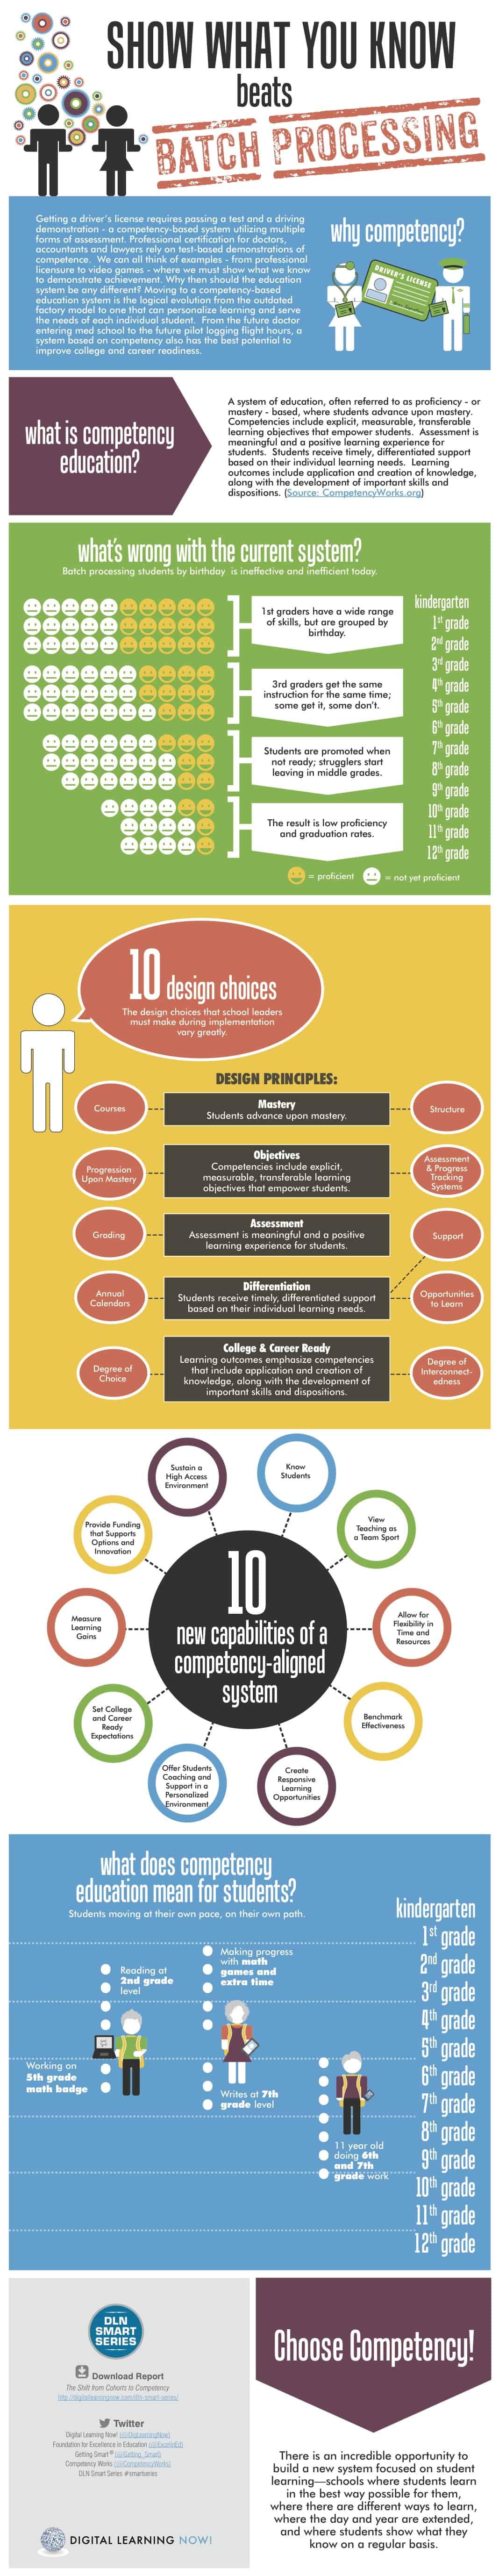 Competency Education Infographic